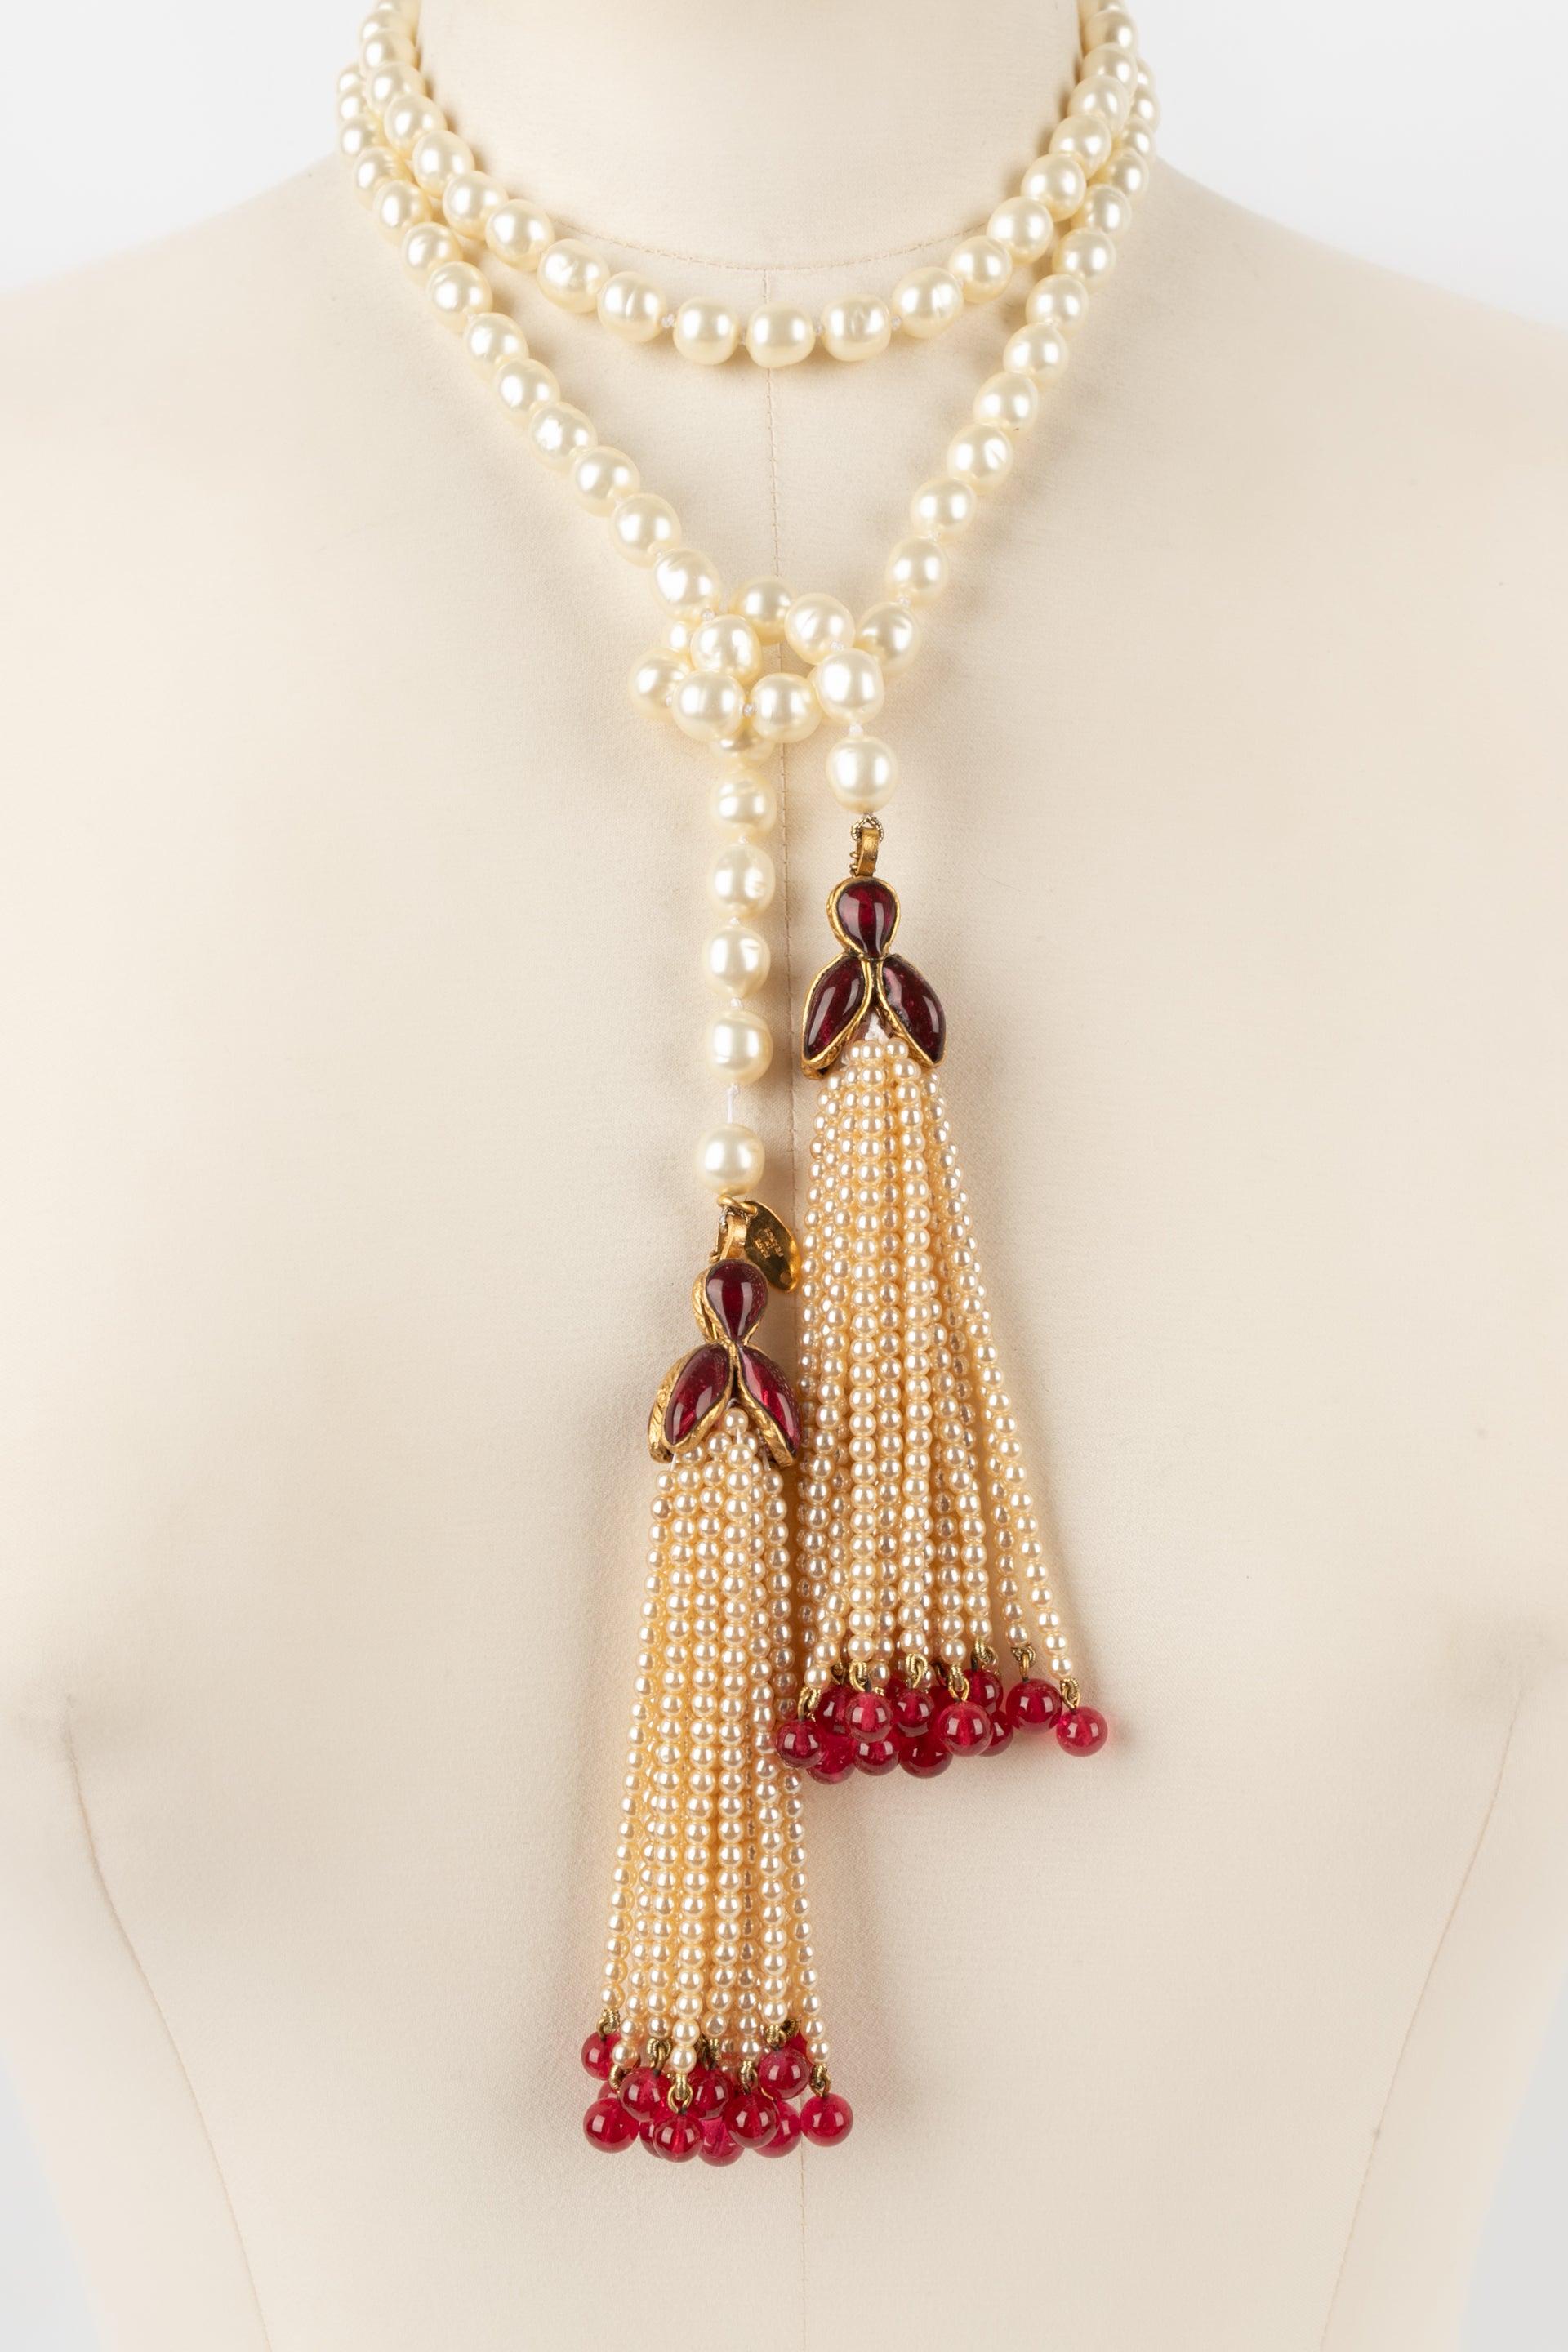 Women's Chanel Tie Necklace with Knot Assembled Costume Pearls, 1983 For Sale